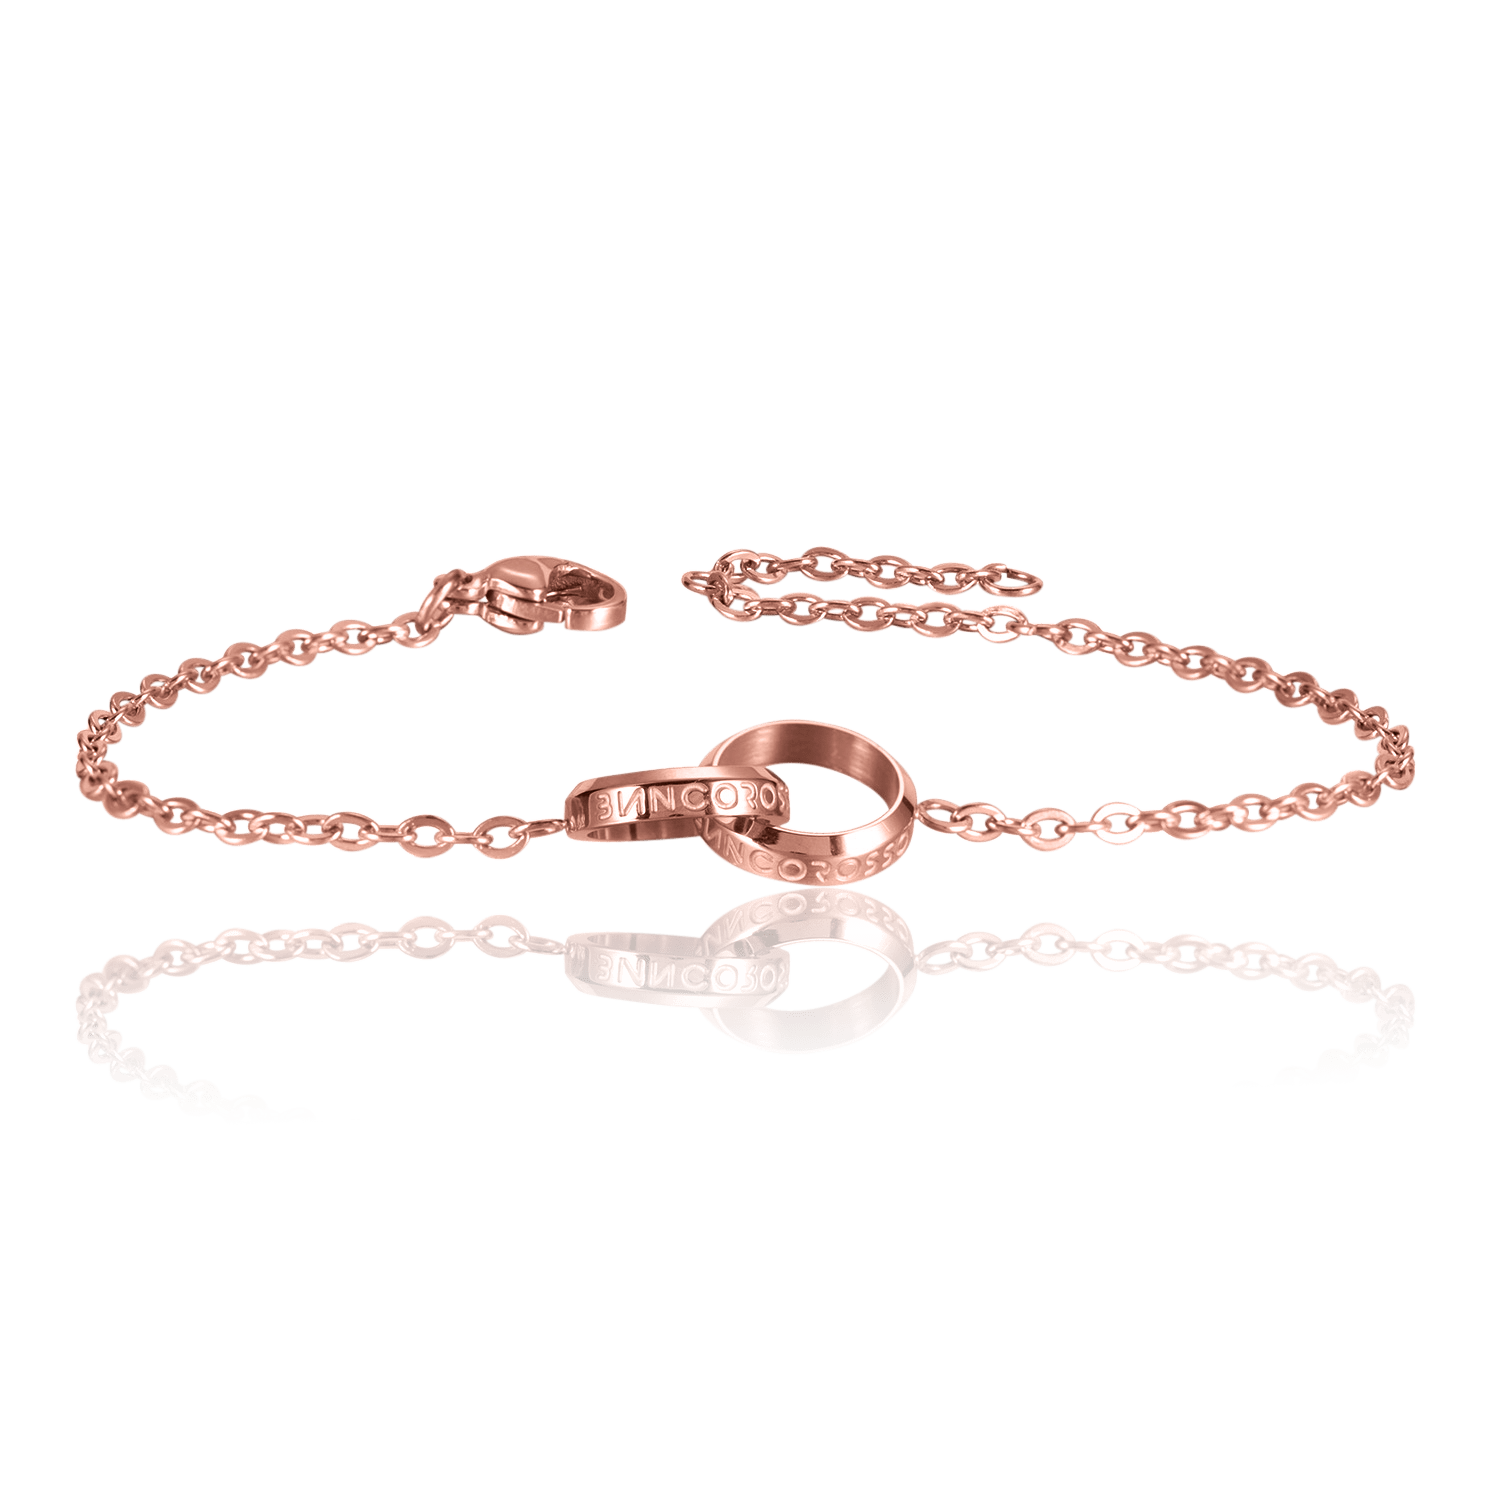 bianco rosso Bracelet Rose Gold Eternity Bracelet - Cards Available cyprus greece jewelry gift free shipping europe worldwide